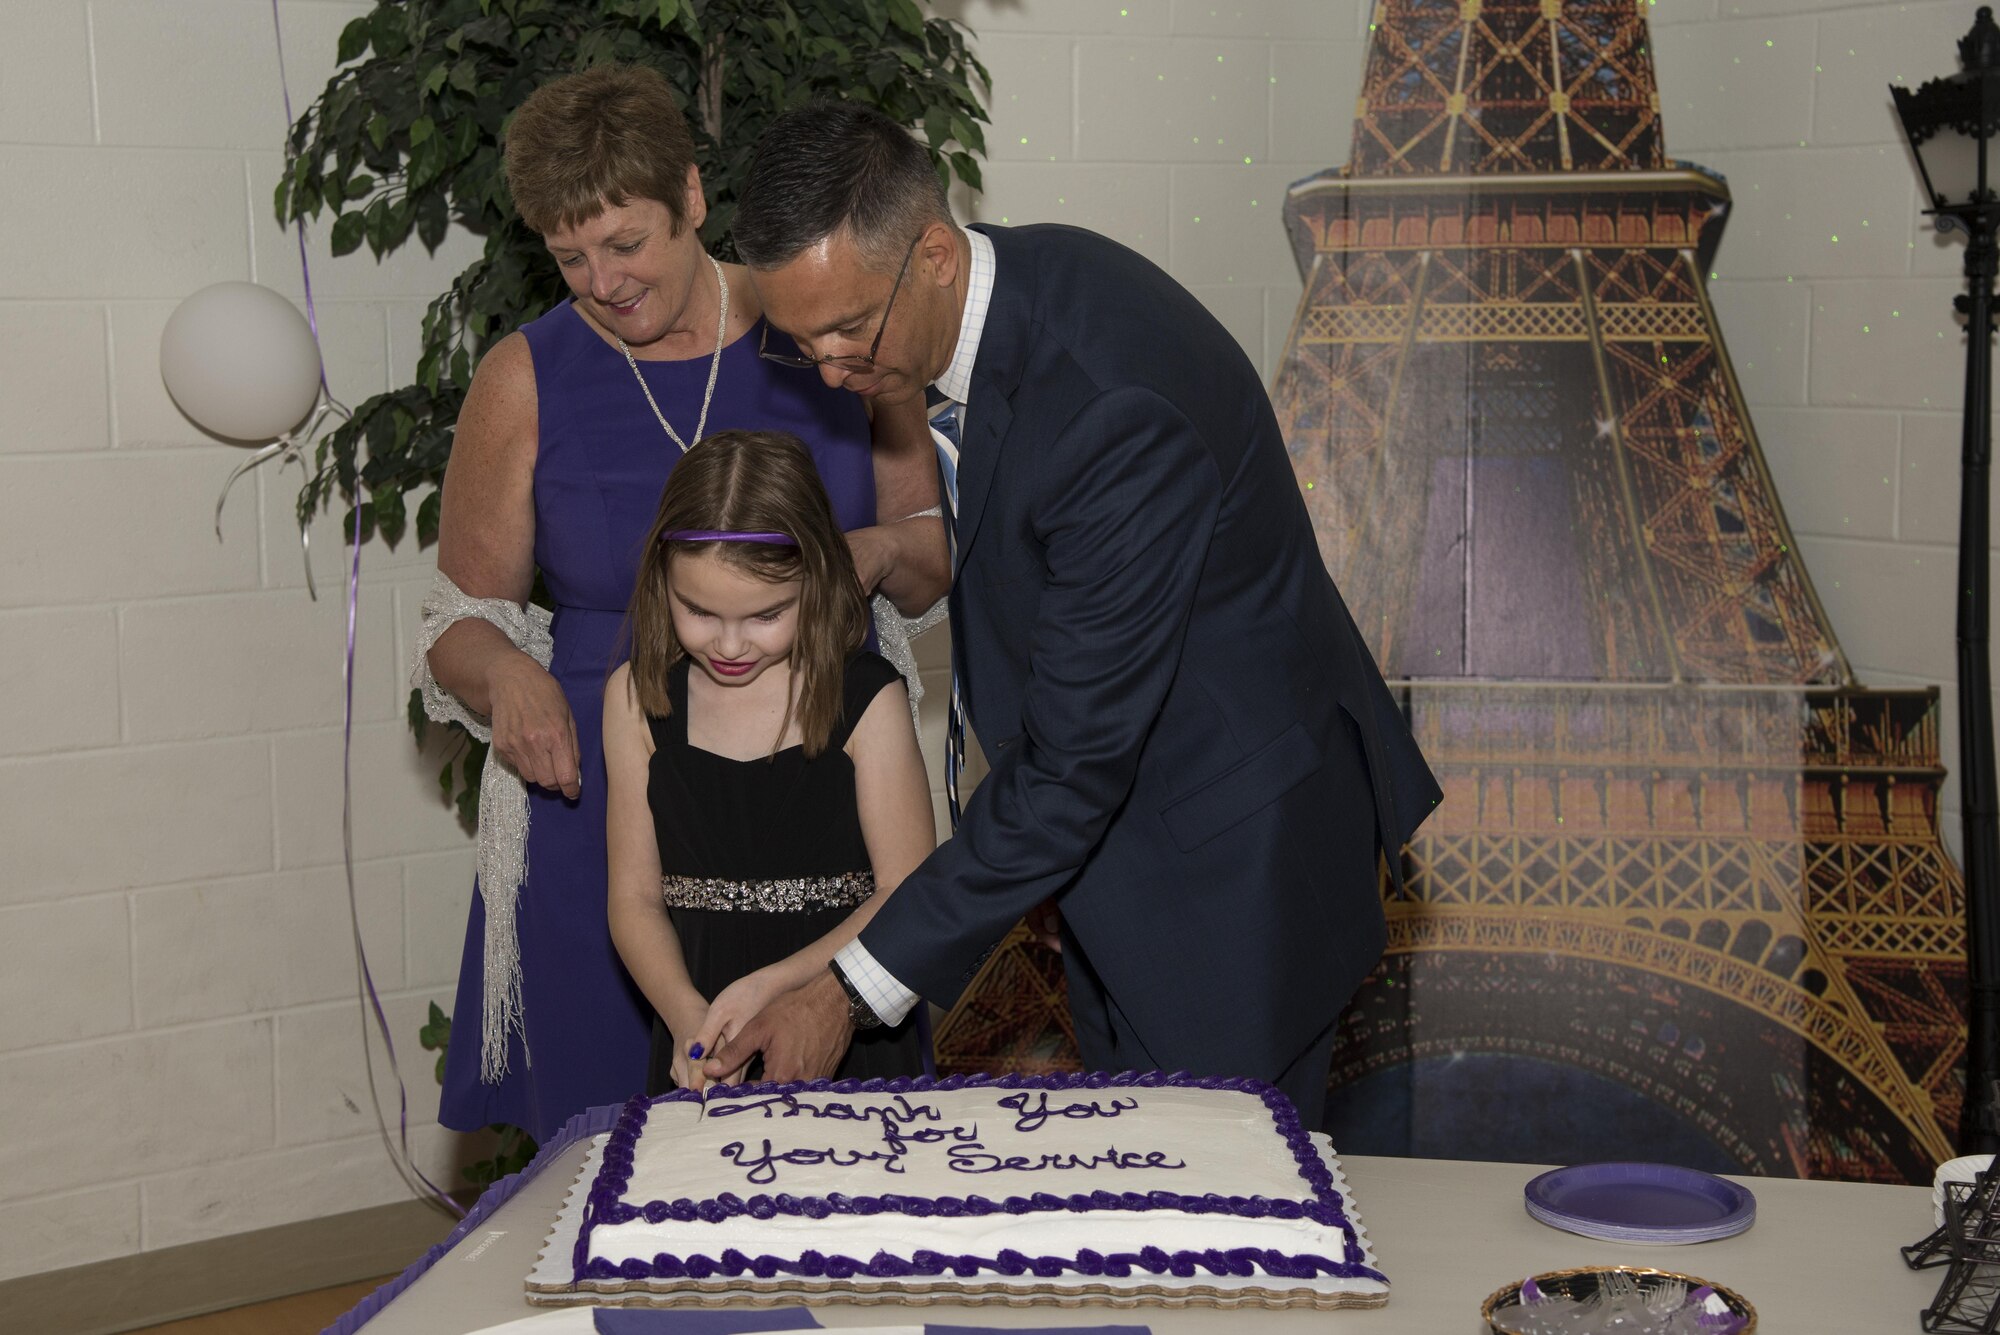 Karen Bradley, 436th Force Support Squadron Airman and Family Services flight chief, Col. Randy Boswell, 436th Mission Support Group commander, and Tory Ruhm, daughter of Staff Sgt. Michael Ruhm, 436th Maintenance Squadron crew chief, cut the cake during Team Dover’s inaugural Purple Ball April 29, 2017, at the Youth Center on Dover Air Force Base, Del. The ball was organized to support military families during the Month of the Military Child, which is a commemorate month celebrated each April. (U.S. Air Force photo by Senior Airman Aaron J. Jenne)